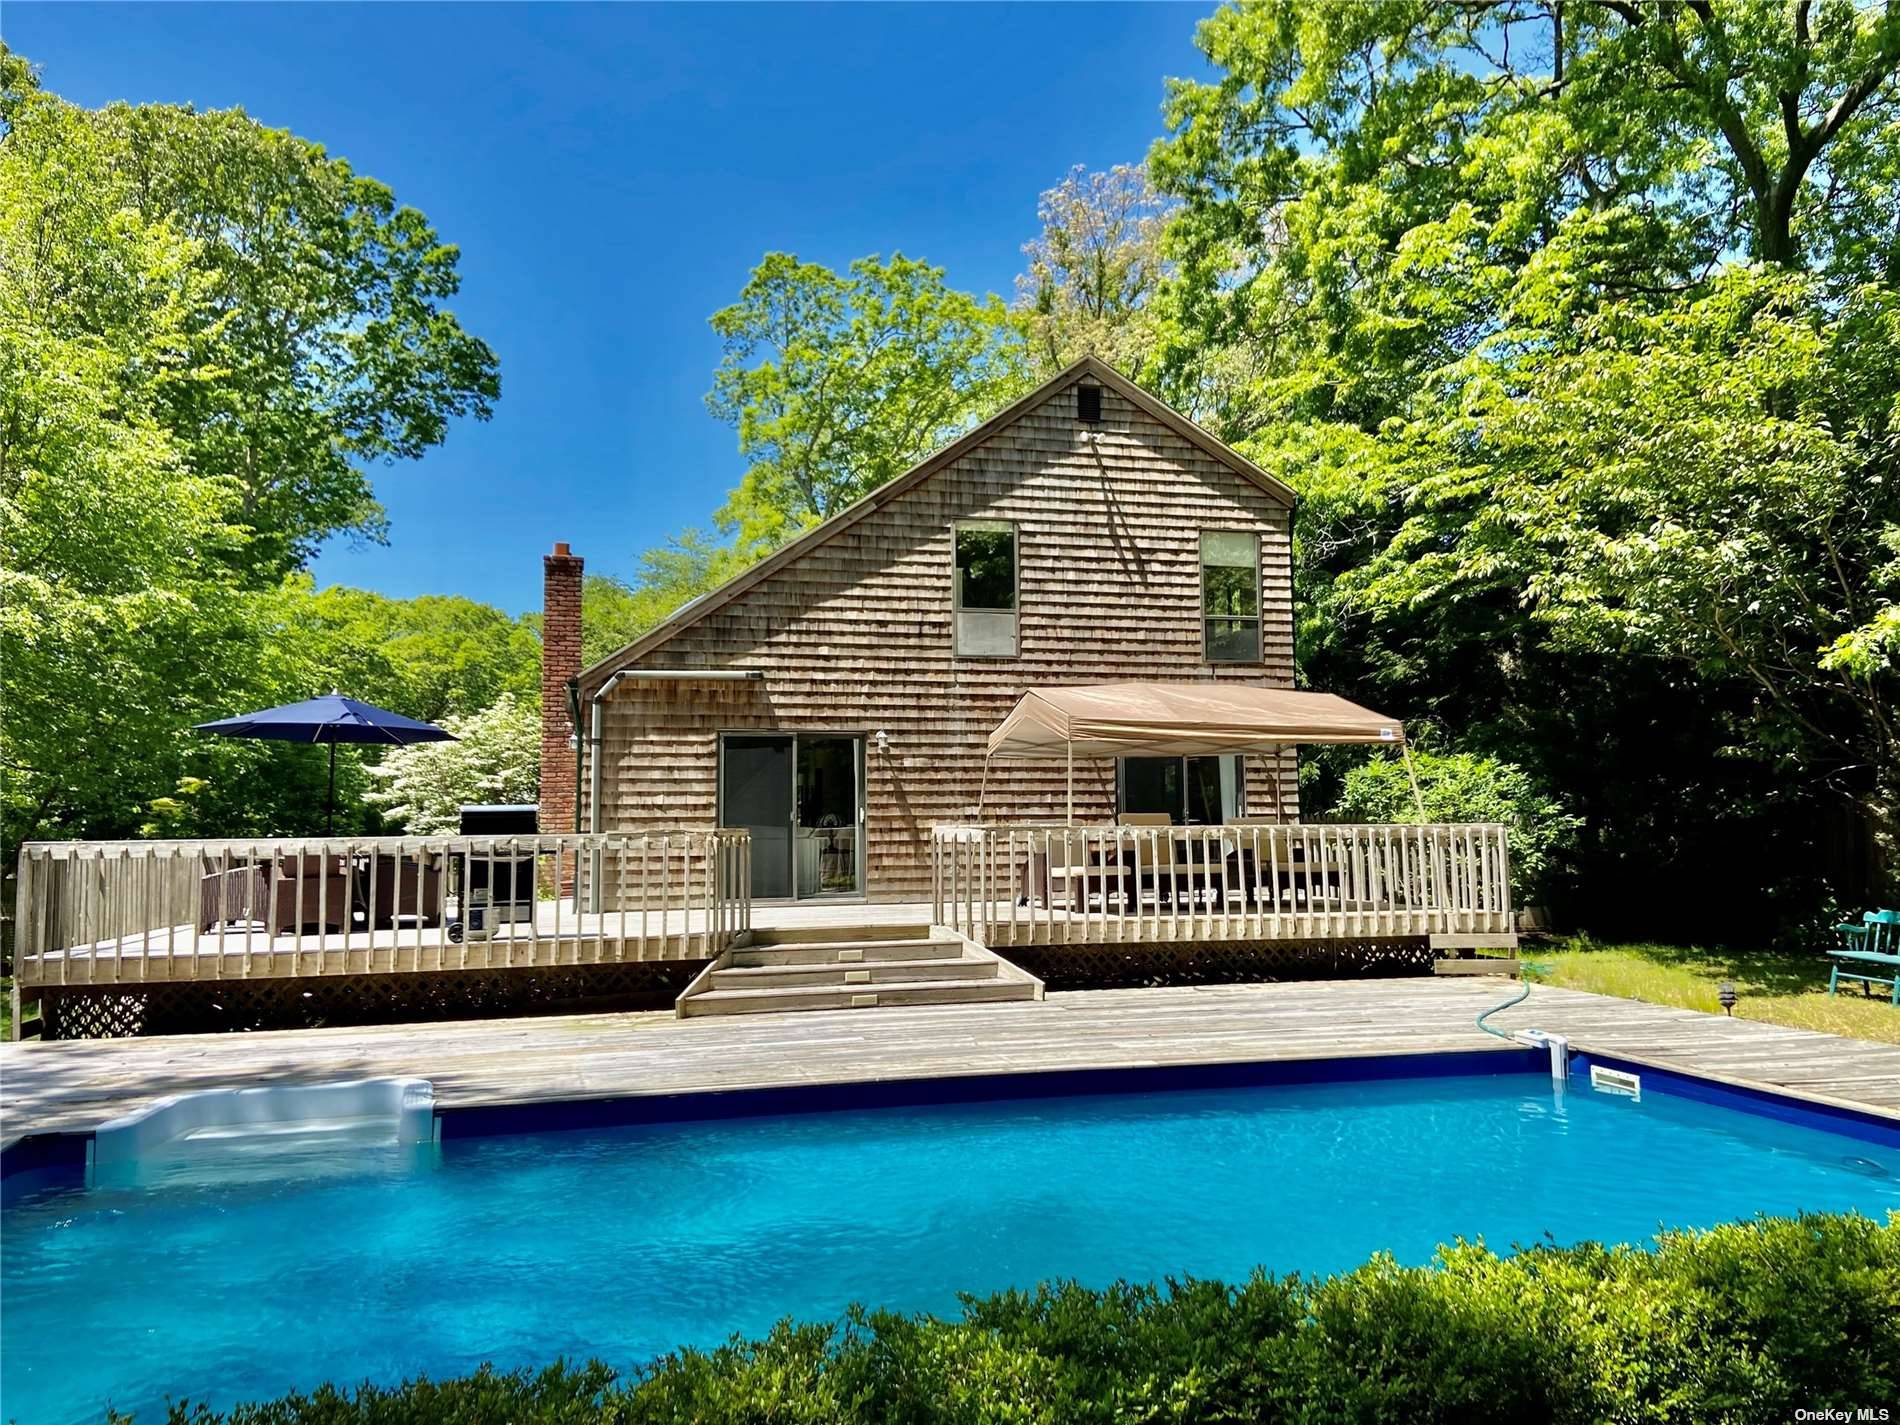 Tucked away saltbox with a pool available to rent June 18, 000, September 4th October 4th 9, 000.